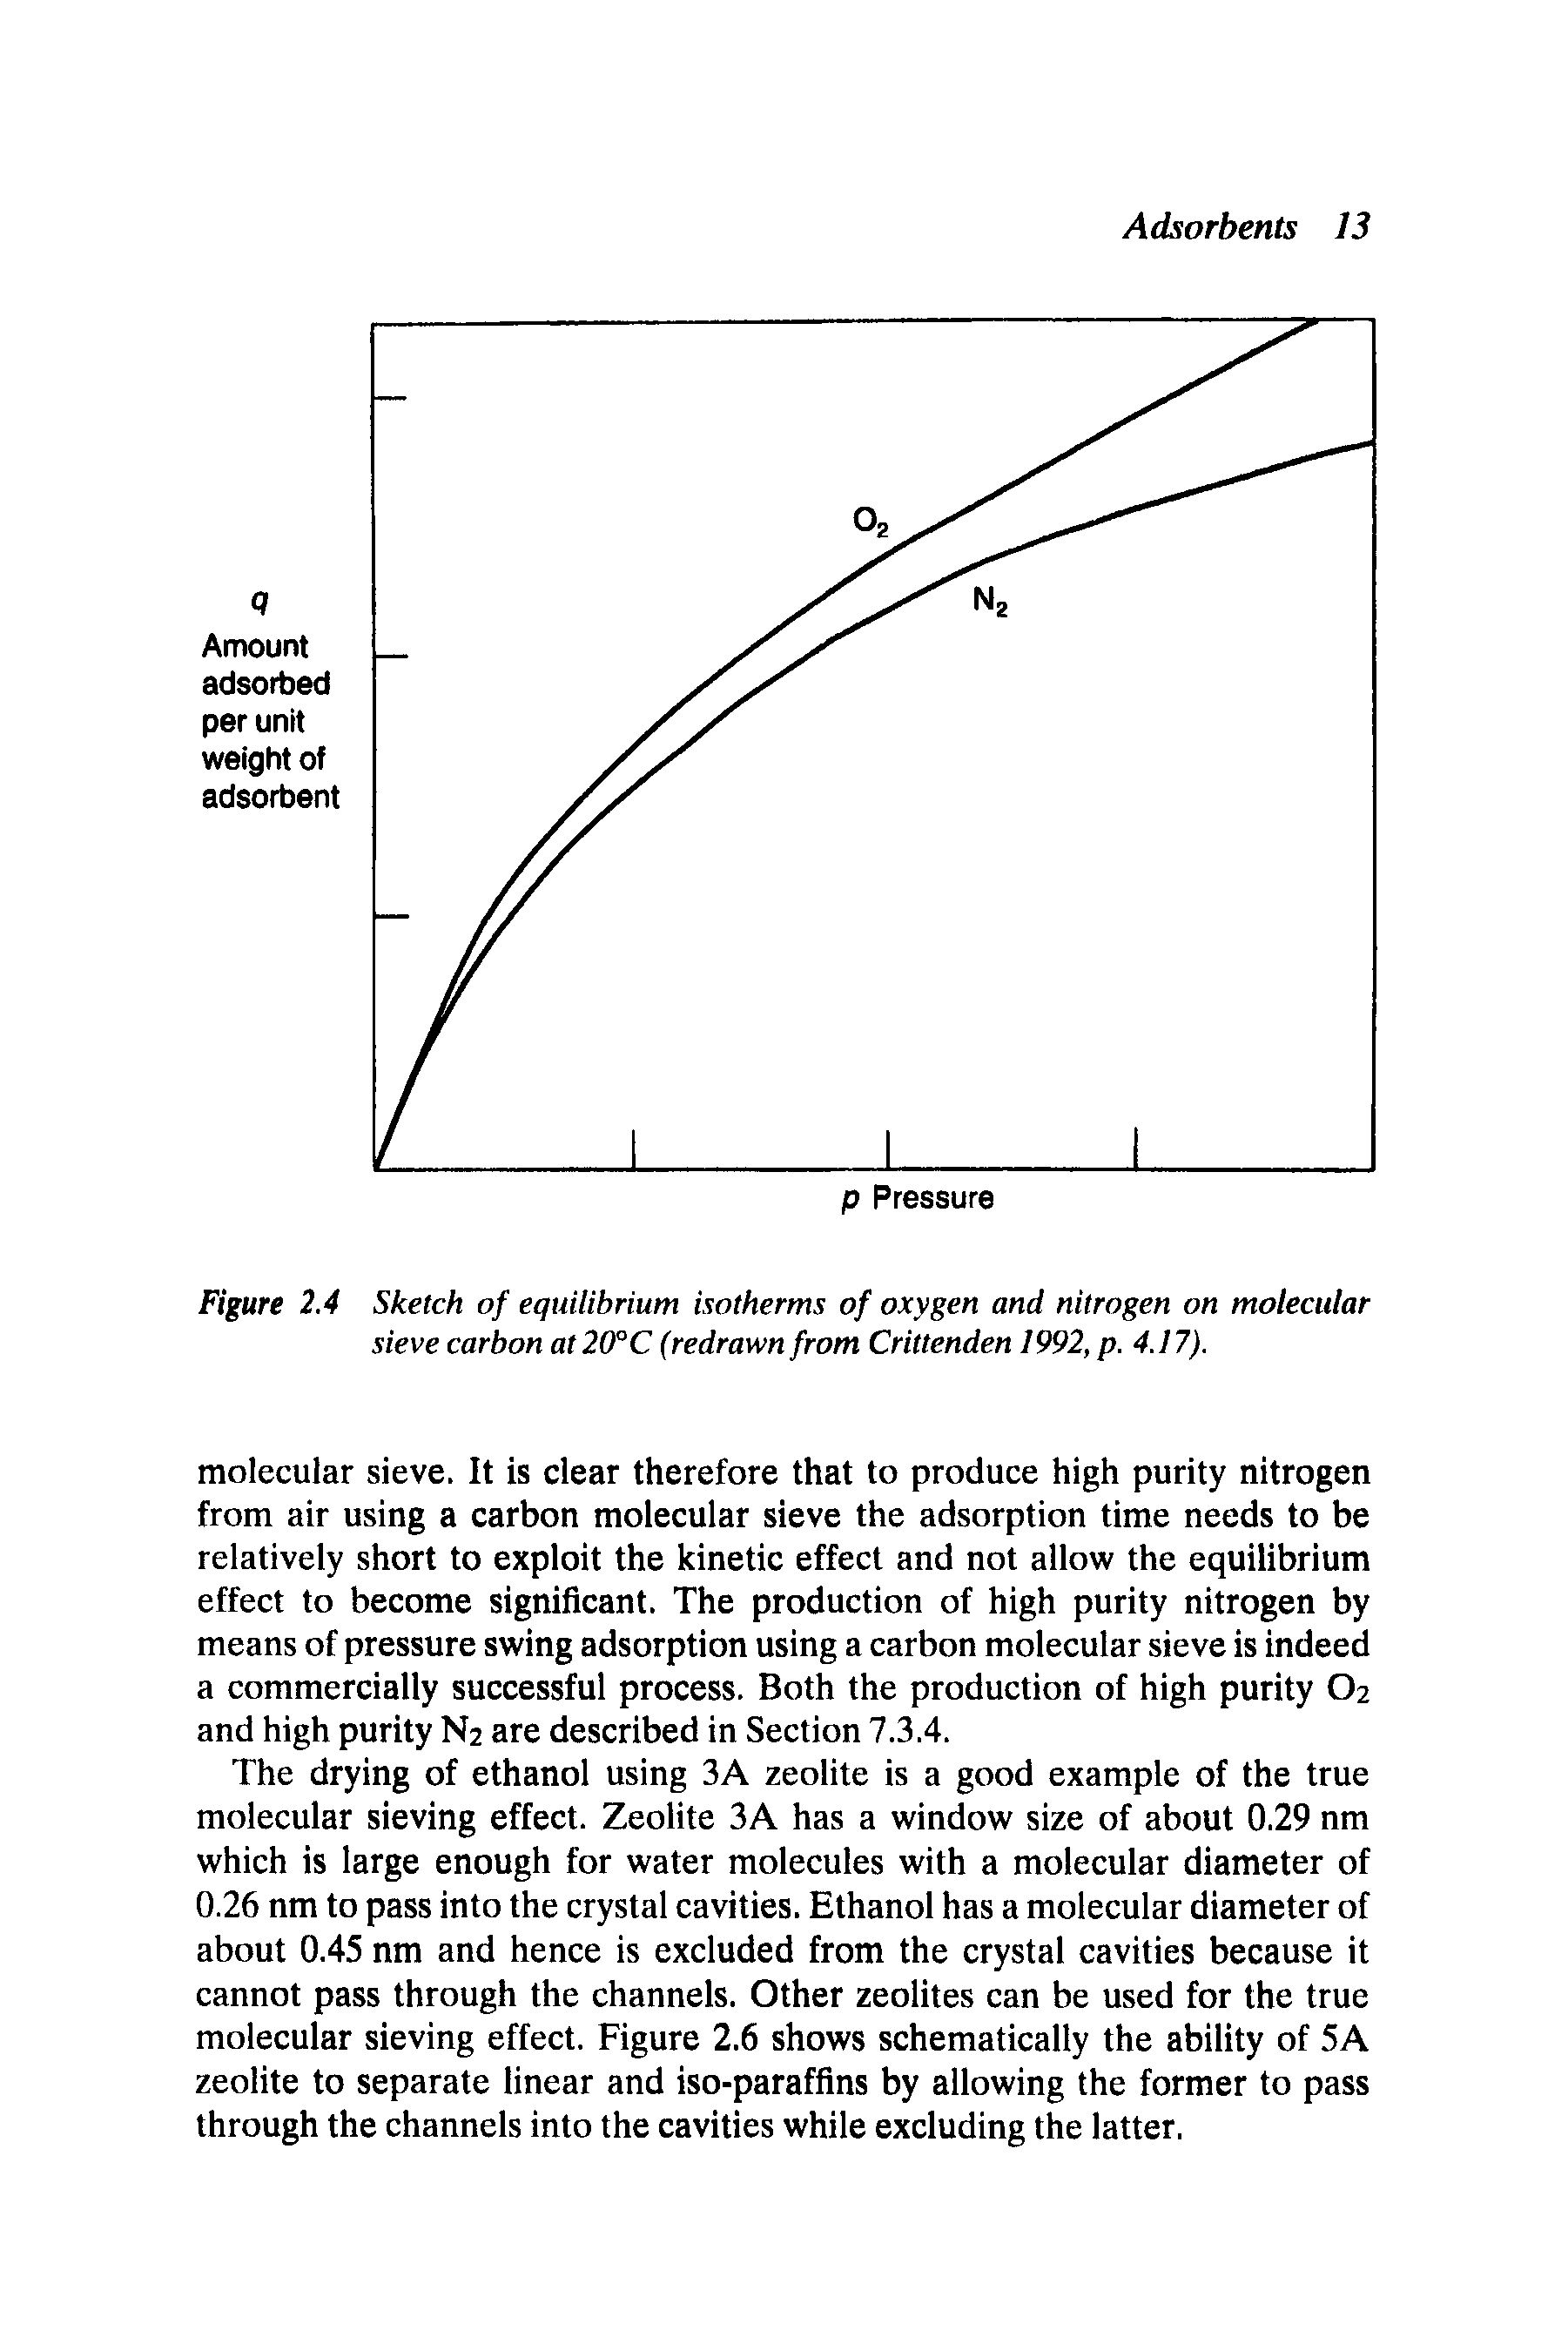 Figure 2.4 Sketch of equilibrium isotherms of oxygen and nitrogen on molecular sieve carbon at2(TC (redrawn from Crittenden 1992, p. 4.17).